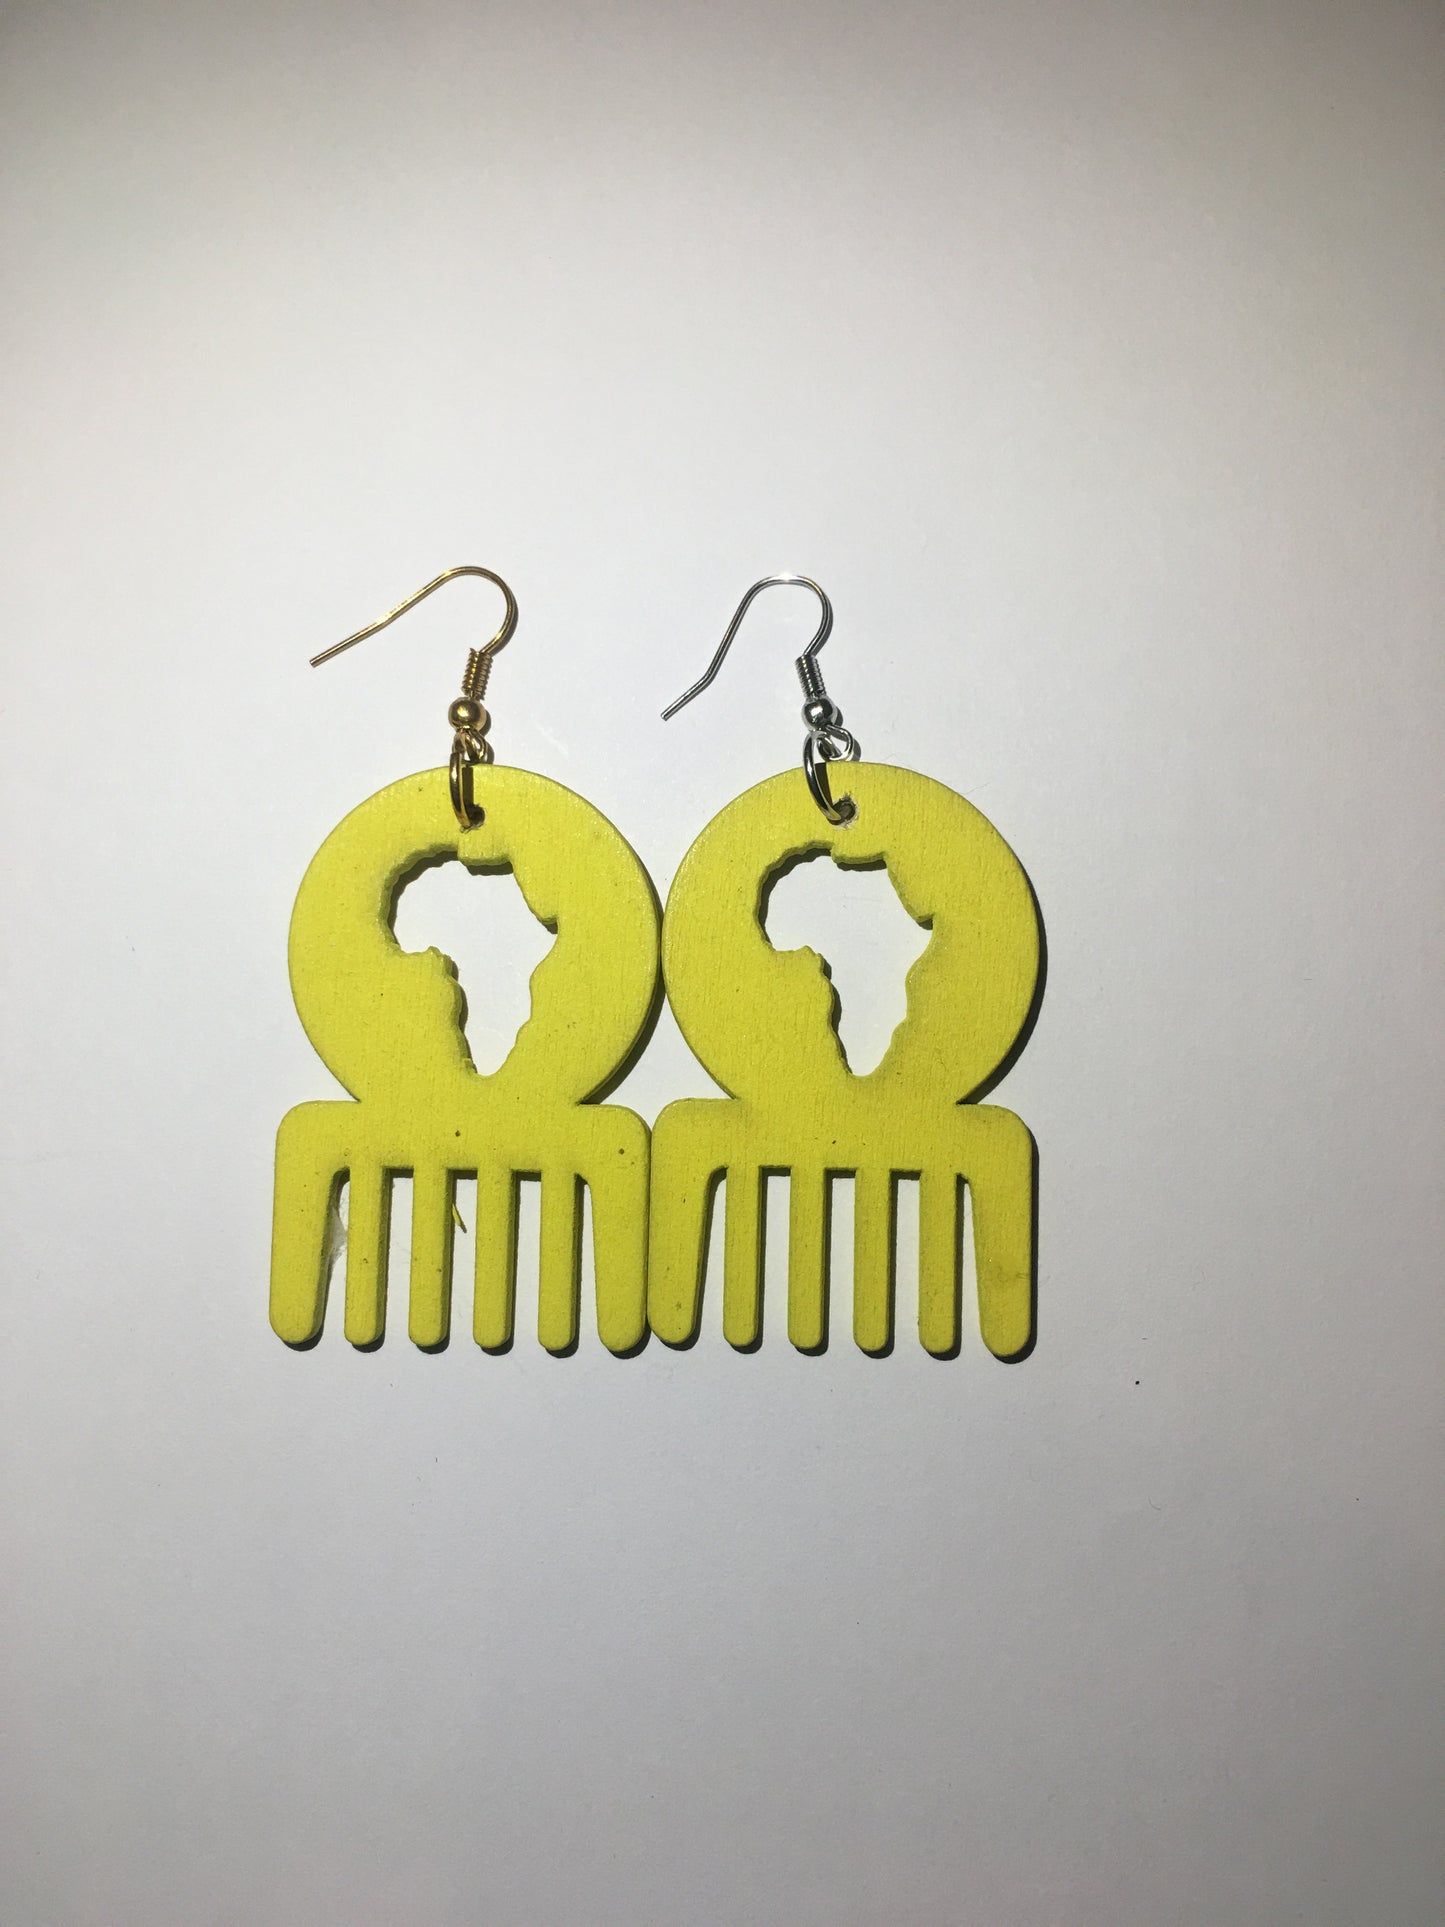 Small afro comb earrings